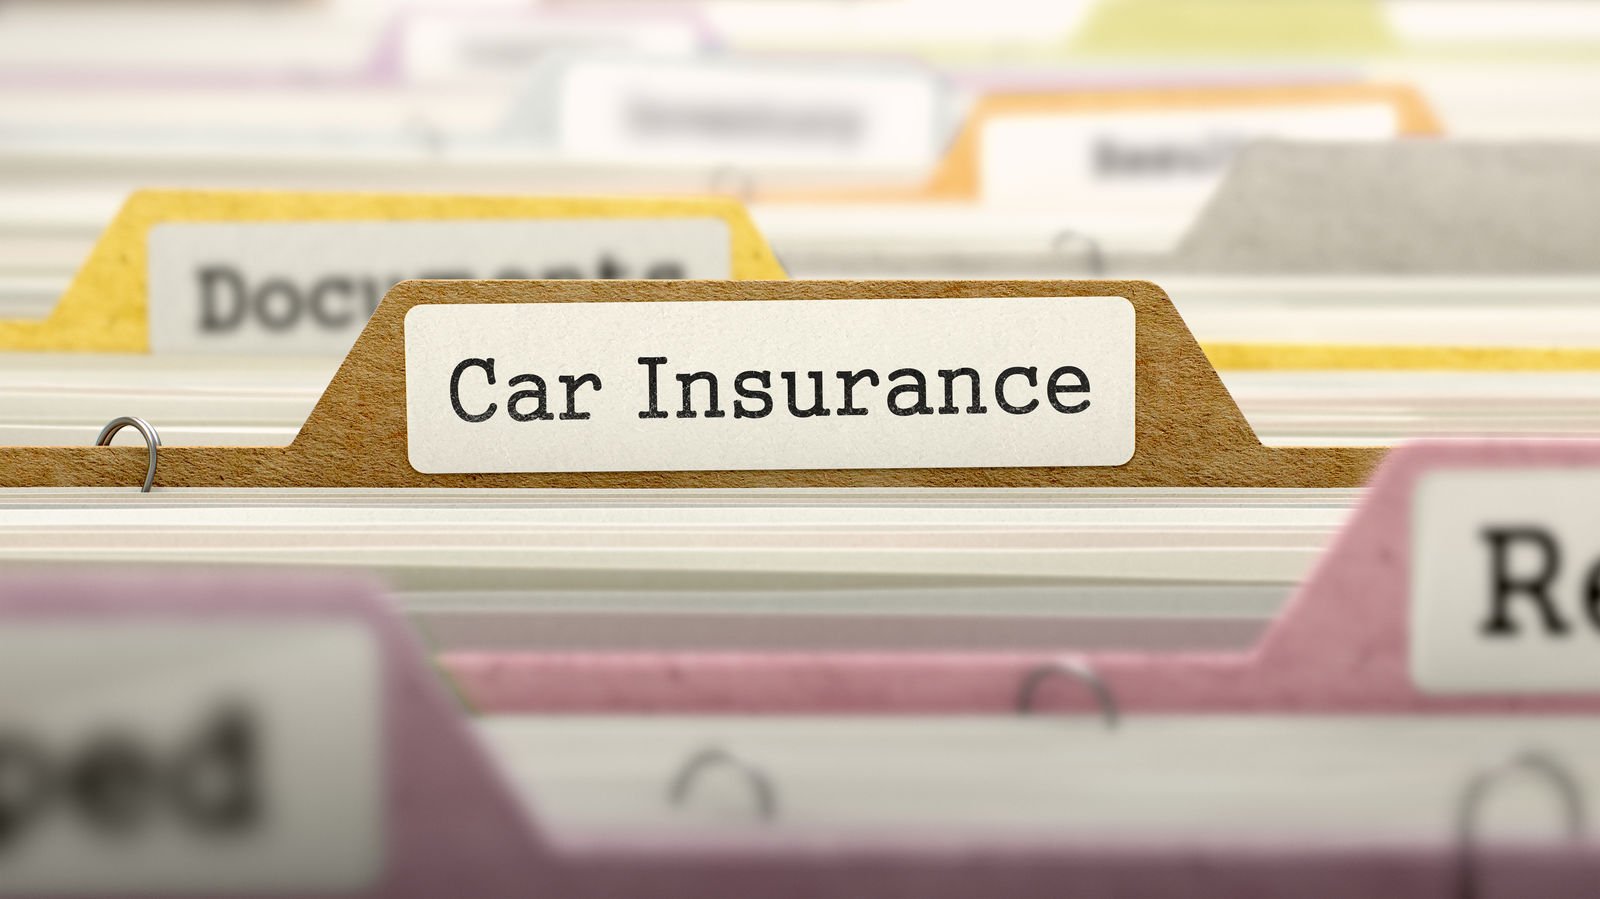 Does my insurance cover me to drive an uninsured car?